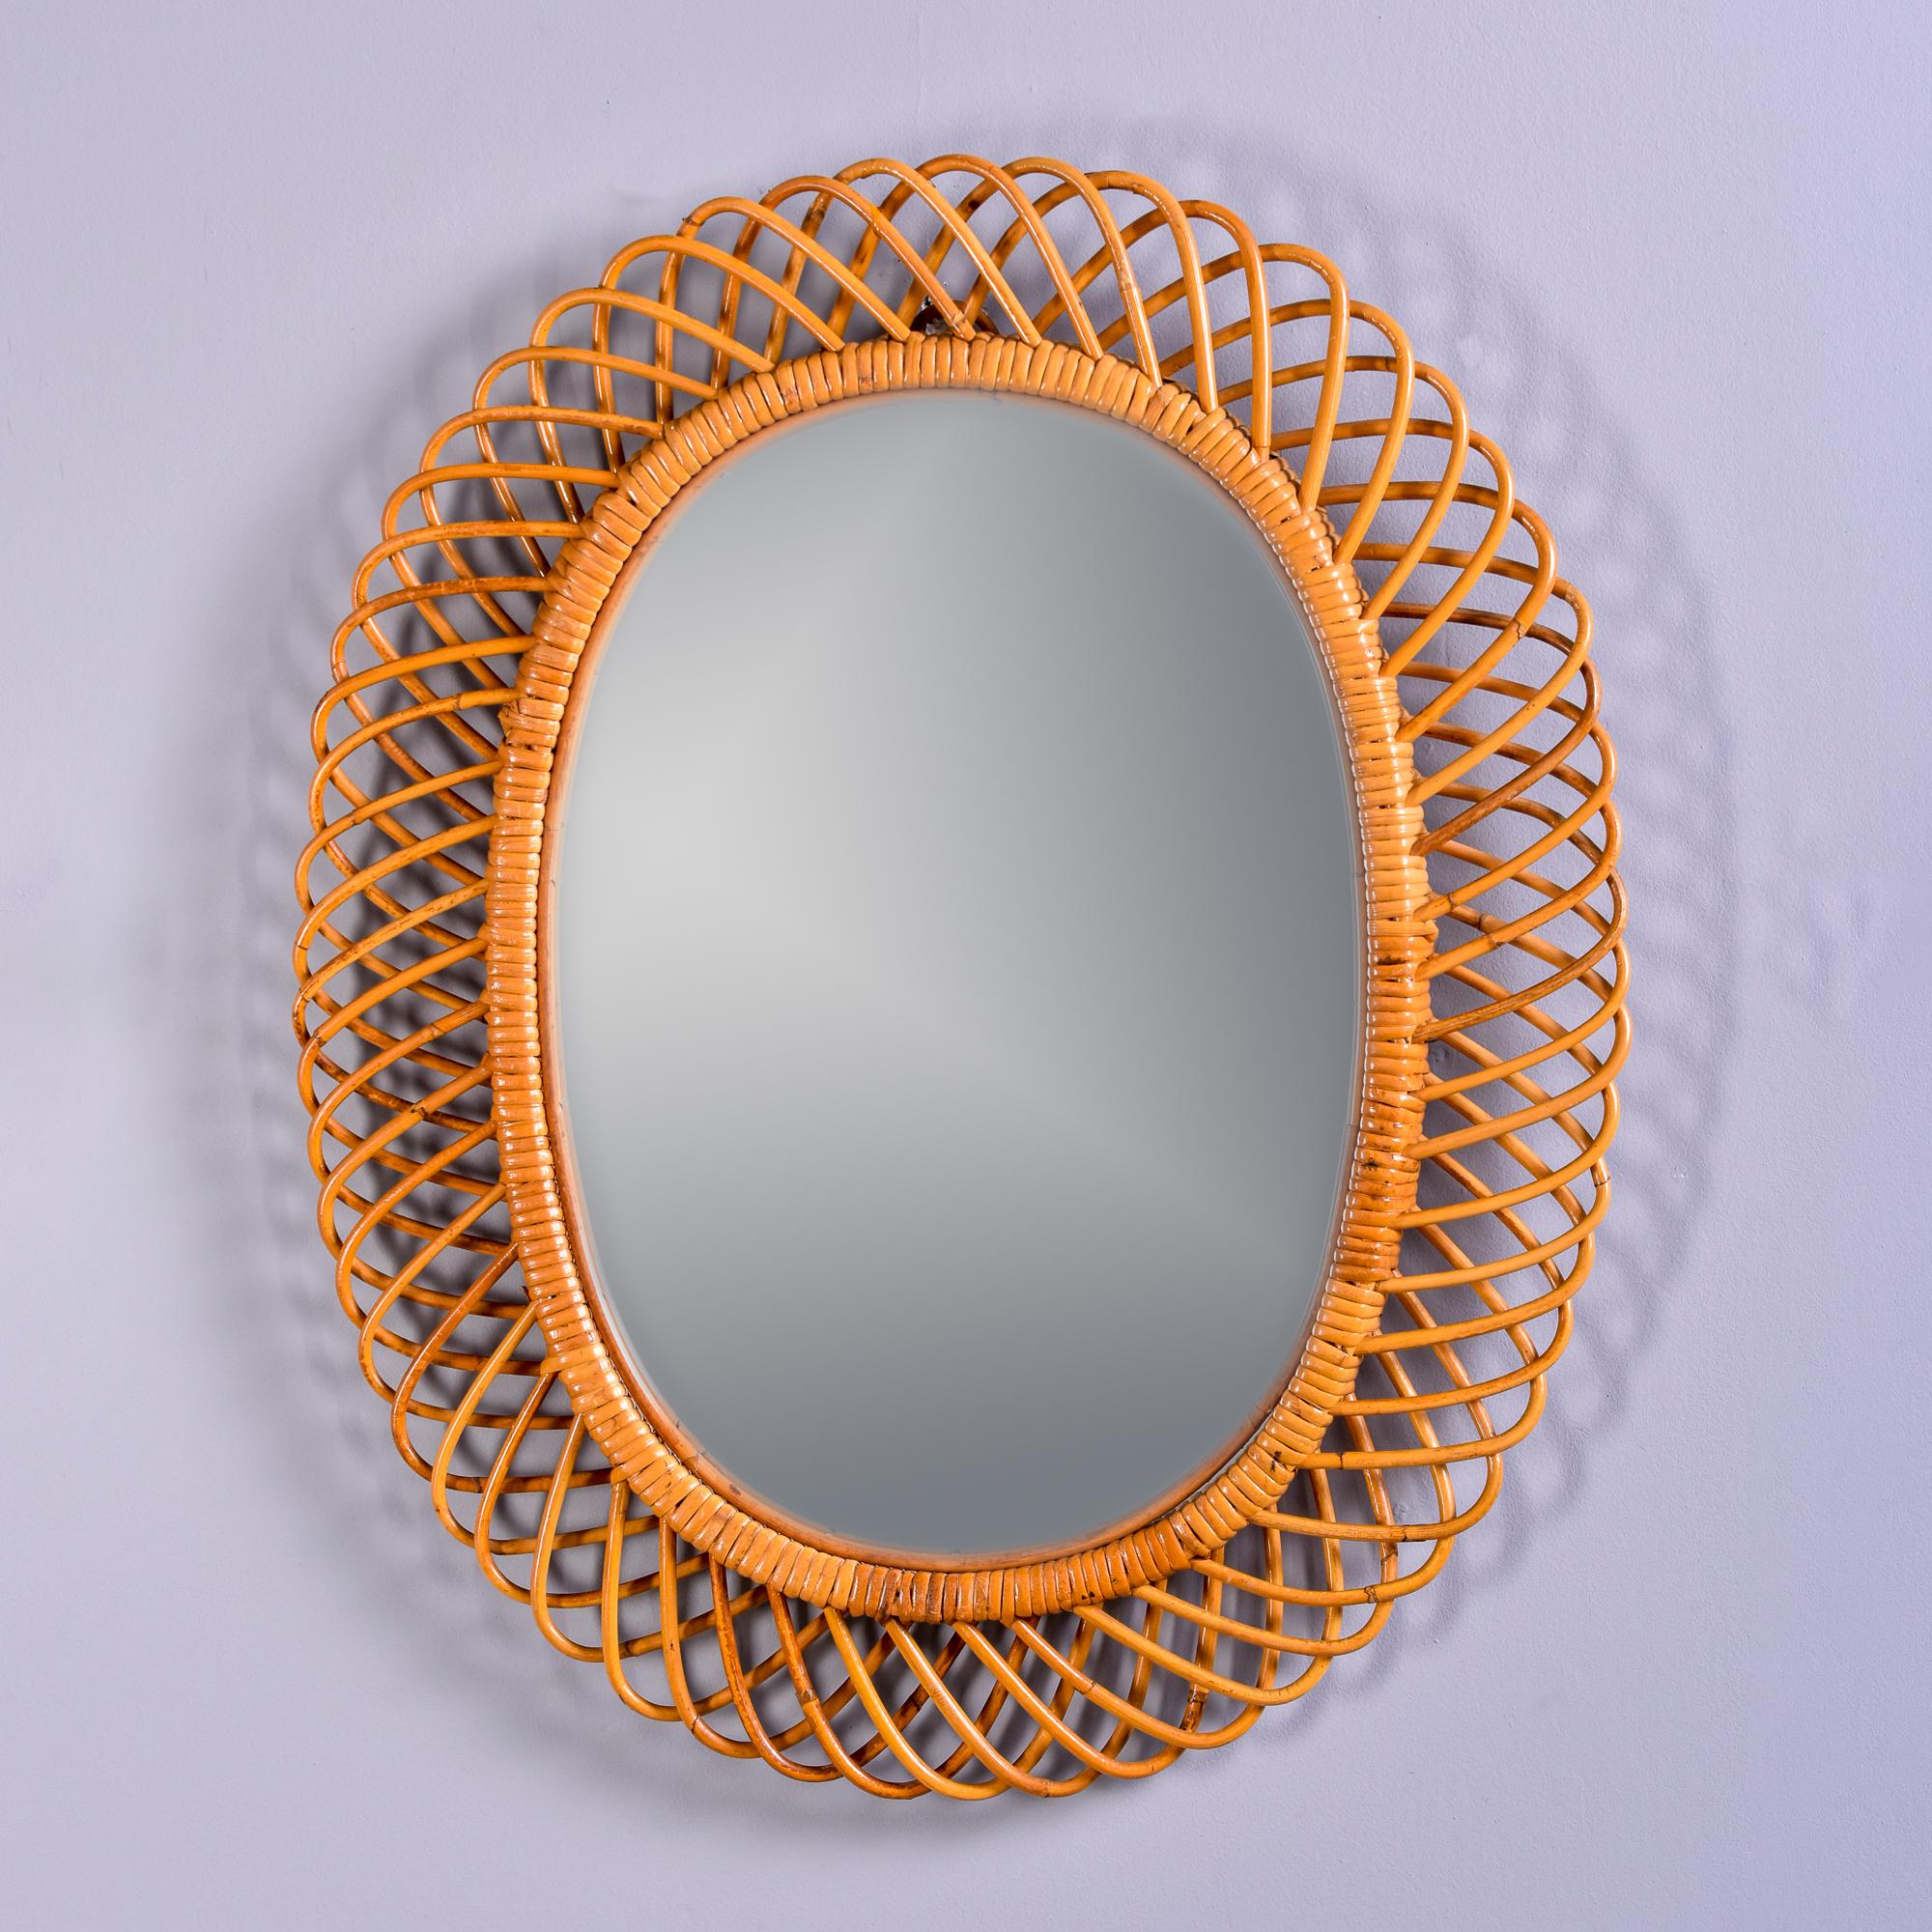 Found in Italy, this circa 1970s oval mirror has a woven rattan frame with a natural color finish. Unknown maker. Very good vintage condition. Additional mirrors in this style available at the time of this posting. Please inquire if interested.